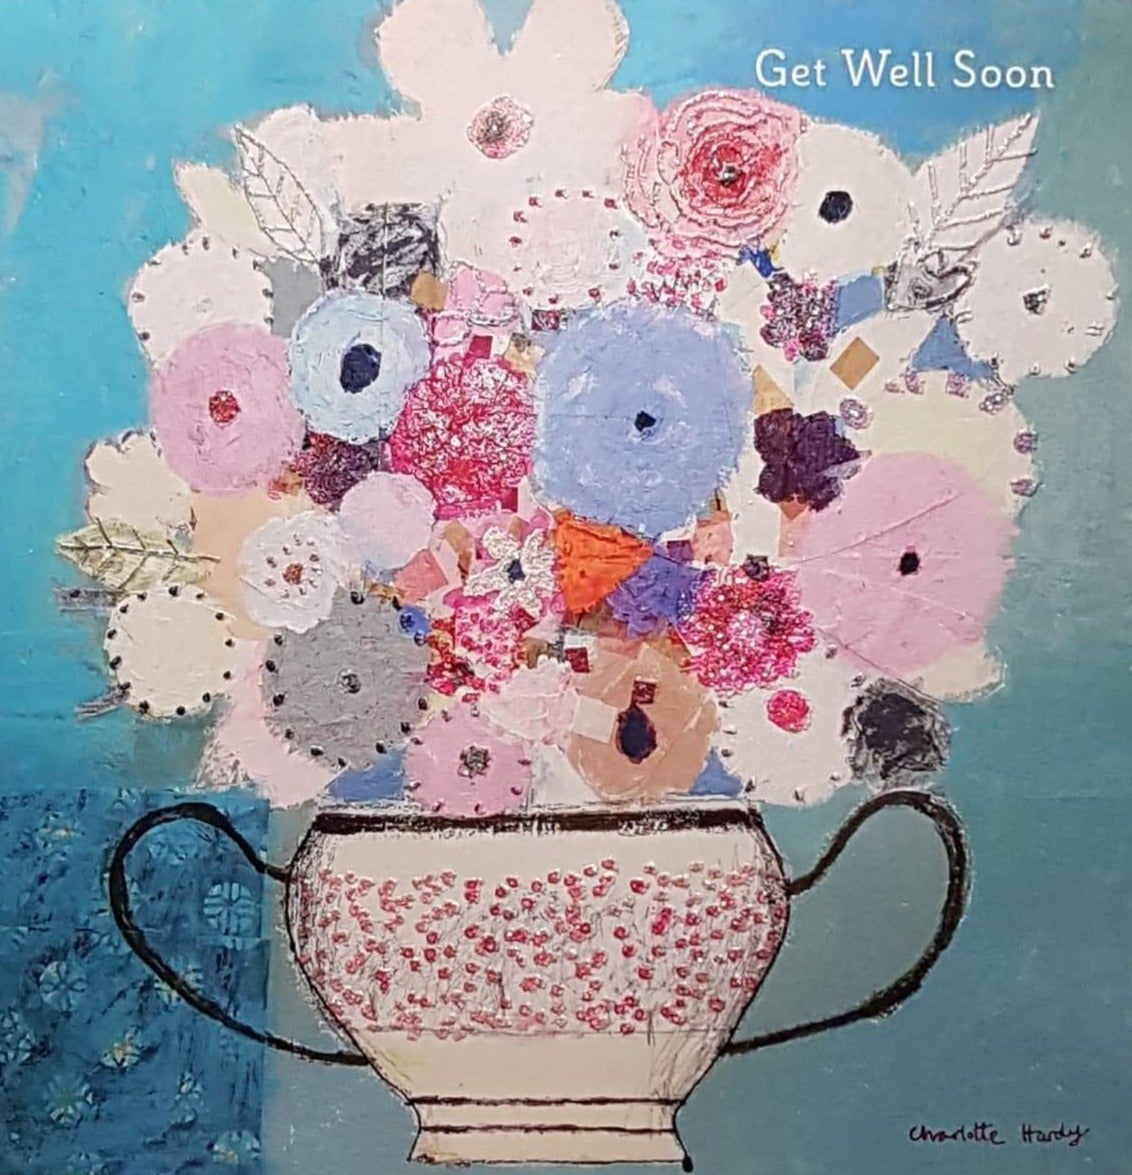 Get Well Card - Flowers From Brussels ( Art )